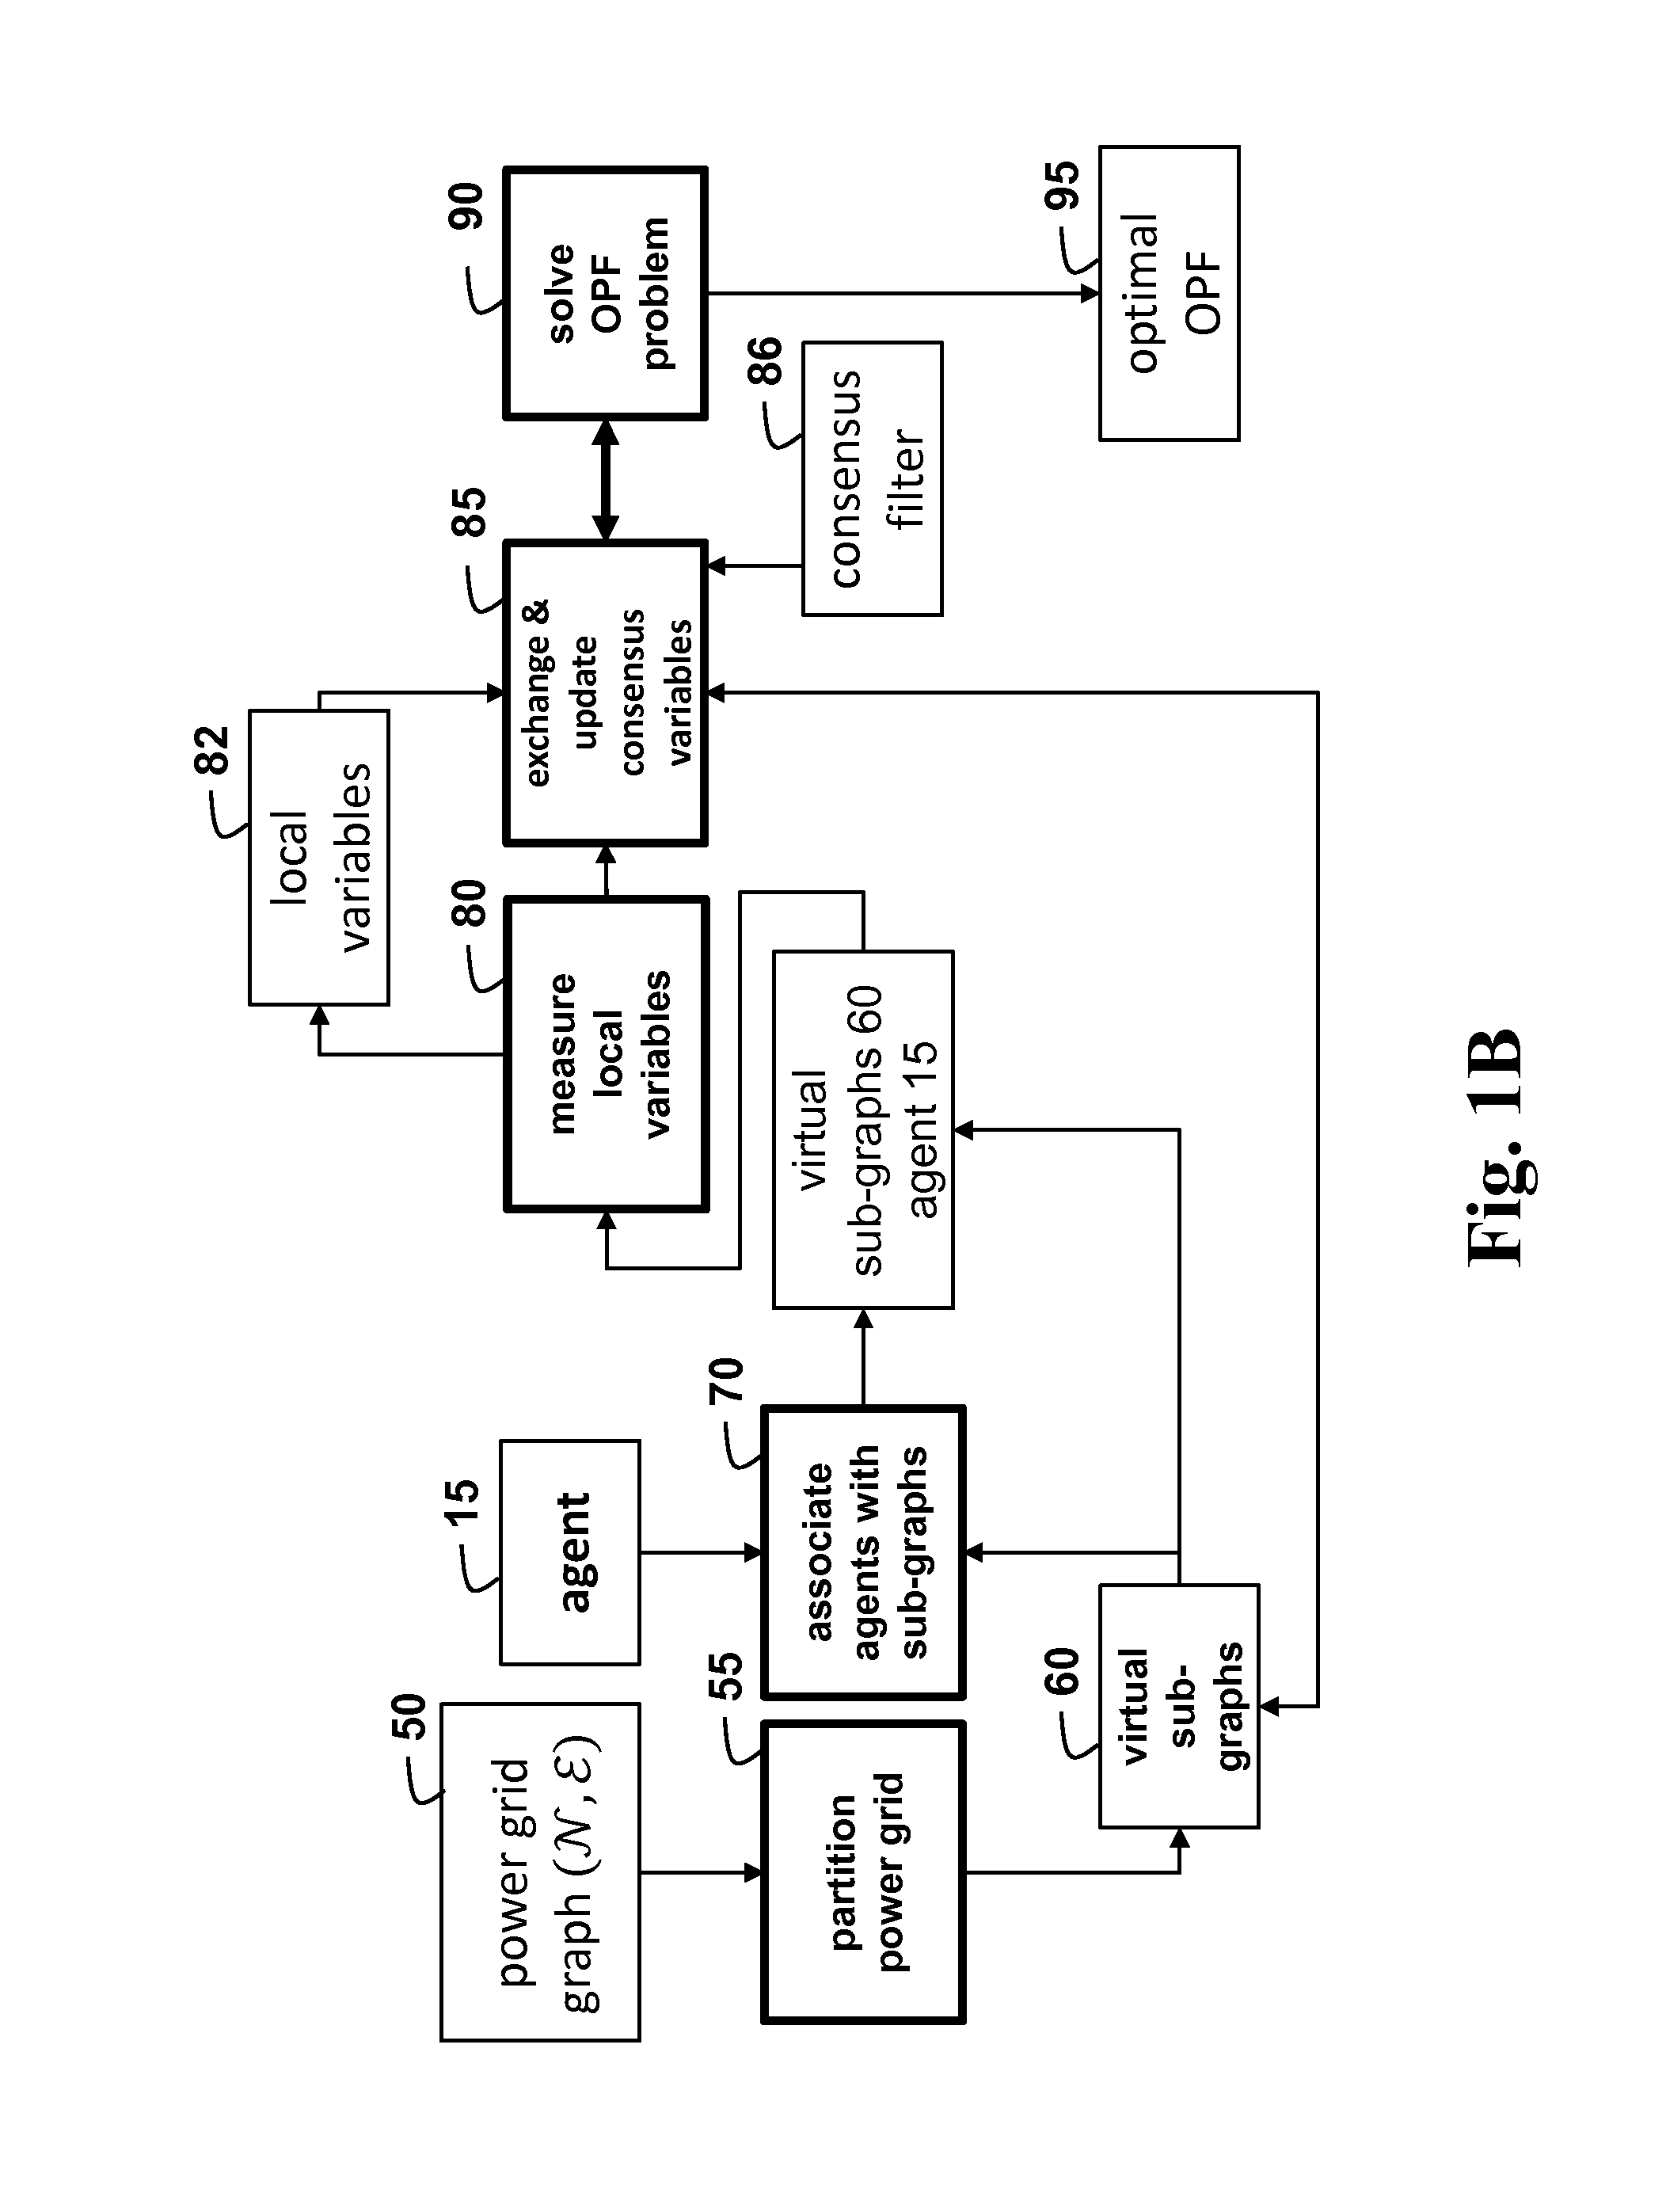 Method for Estimating Optimal Power Flows in Power Grids using Consensus-Based Distributed Processing